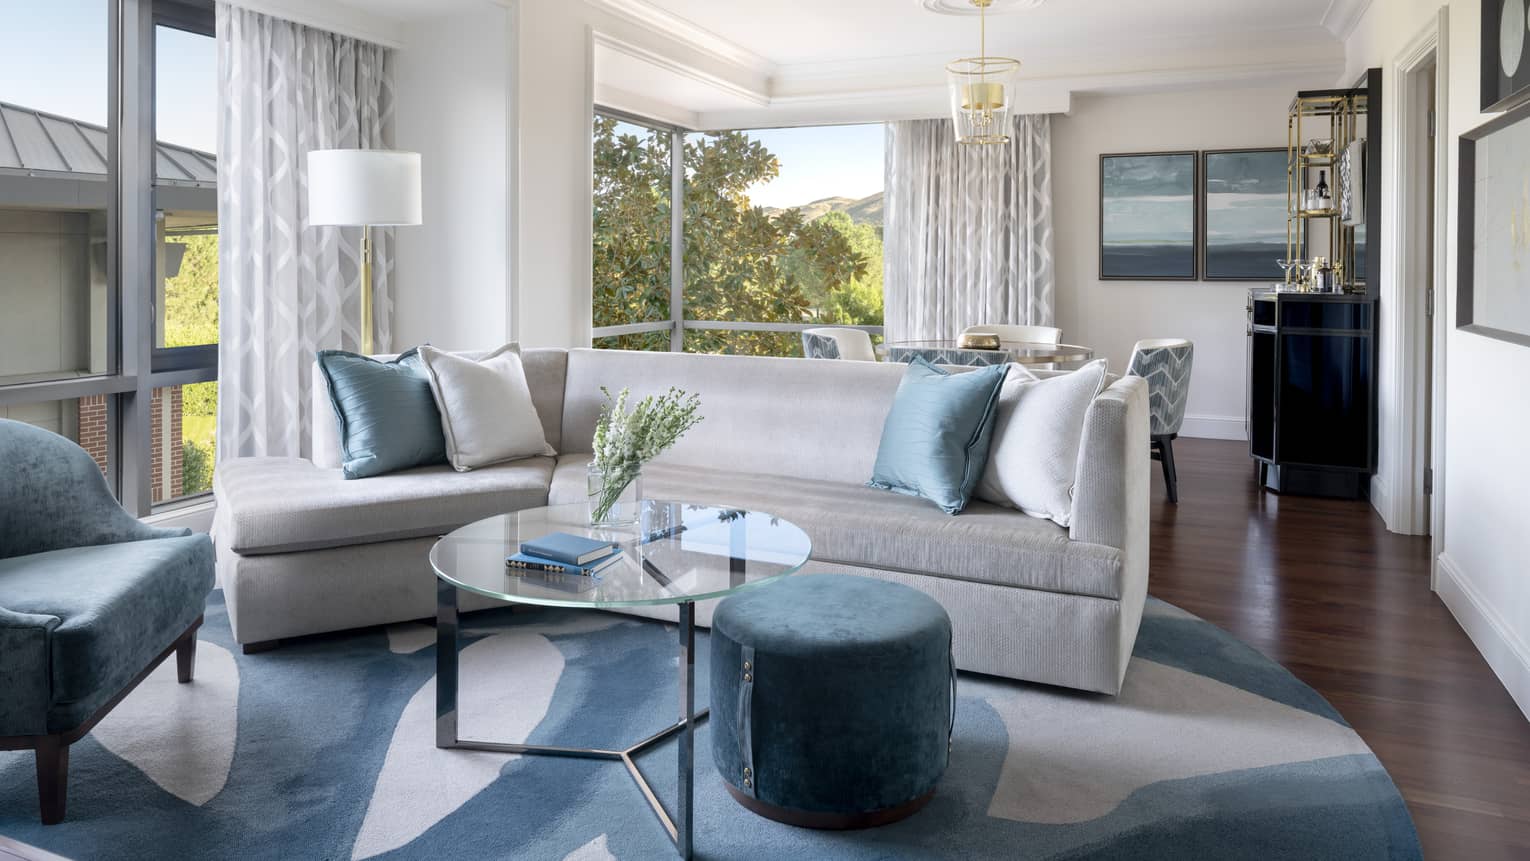 Silver couch with blue pillows, a blue chair, glass coffee table, and a view of trees 